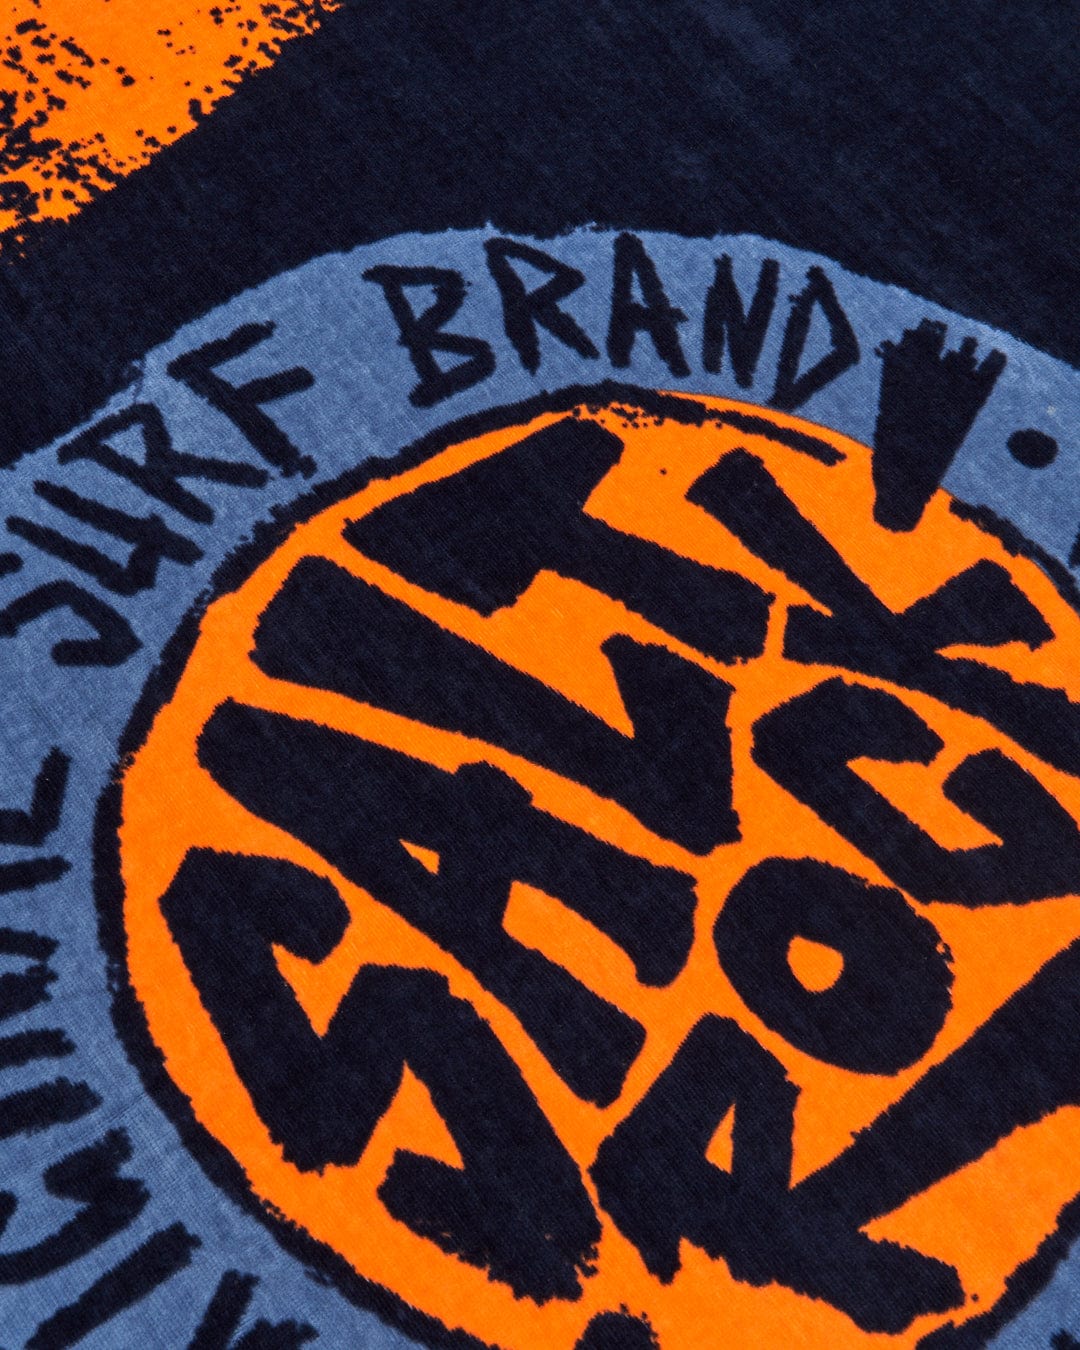 Close-up of a soft SR Original Towel Blue with a graphic print featuring the phrases "off the wall" and "off the wall brand" around a stylized orange and black circle logo with Saltrock branding.